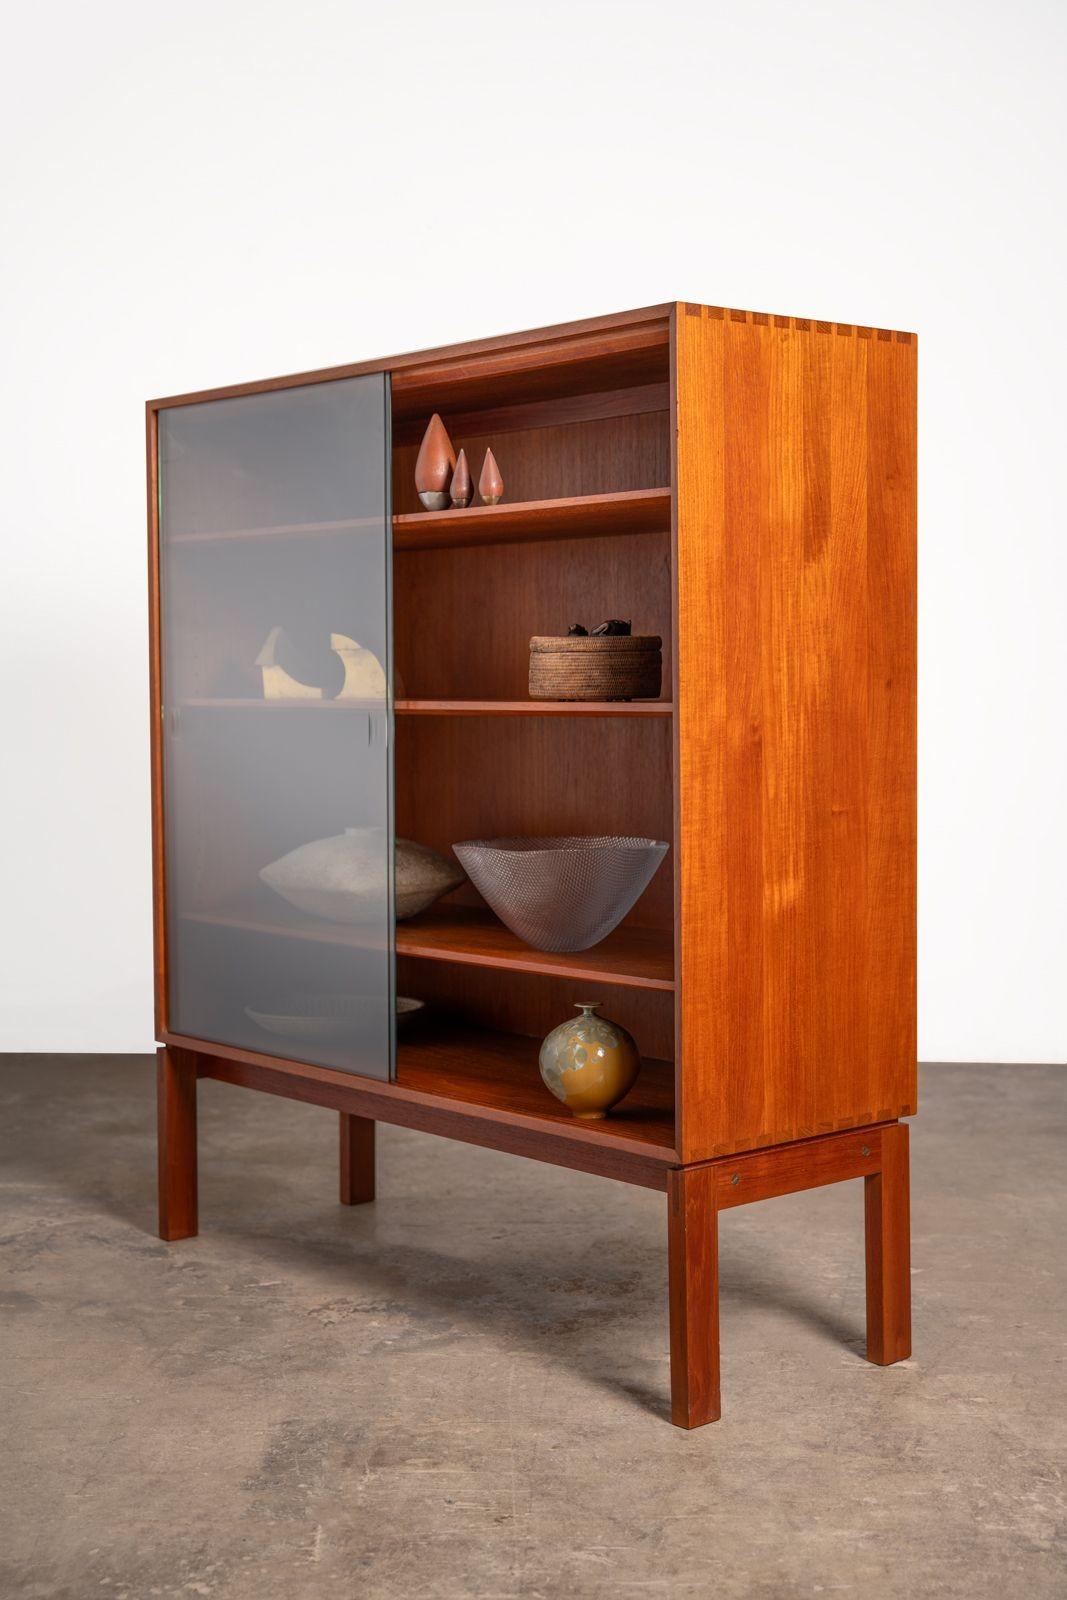 A rare Johannes Aasbjerg vitrine imported from Denmark in the 1960s. This is a deep display case so it will accommodate larger ceramic bowls and sculptures that smaller bookcases will not. Extraordinarily well crafted of solid teak. The doors are